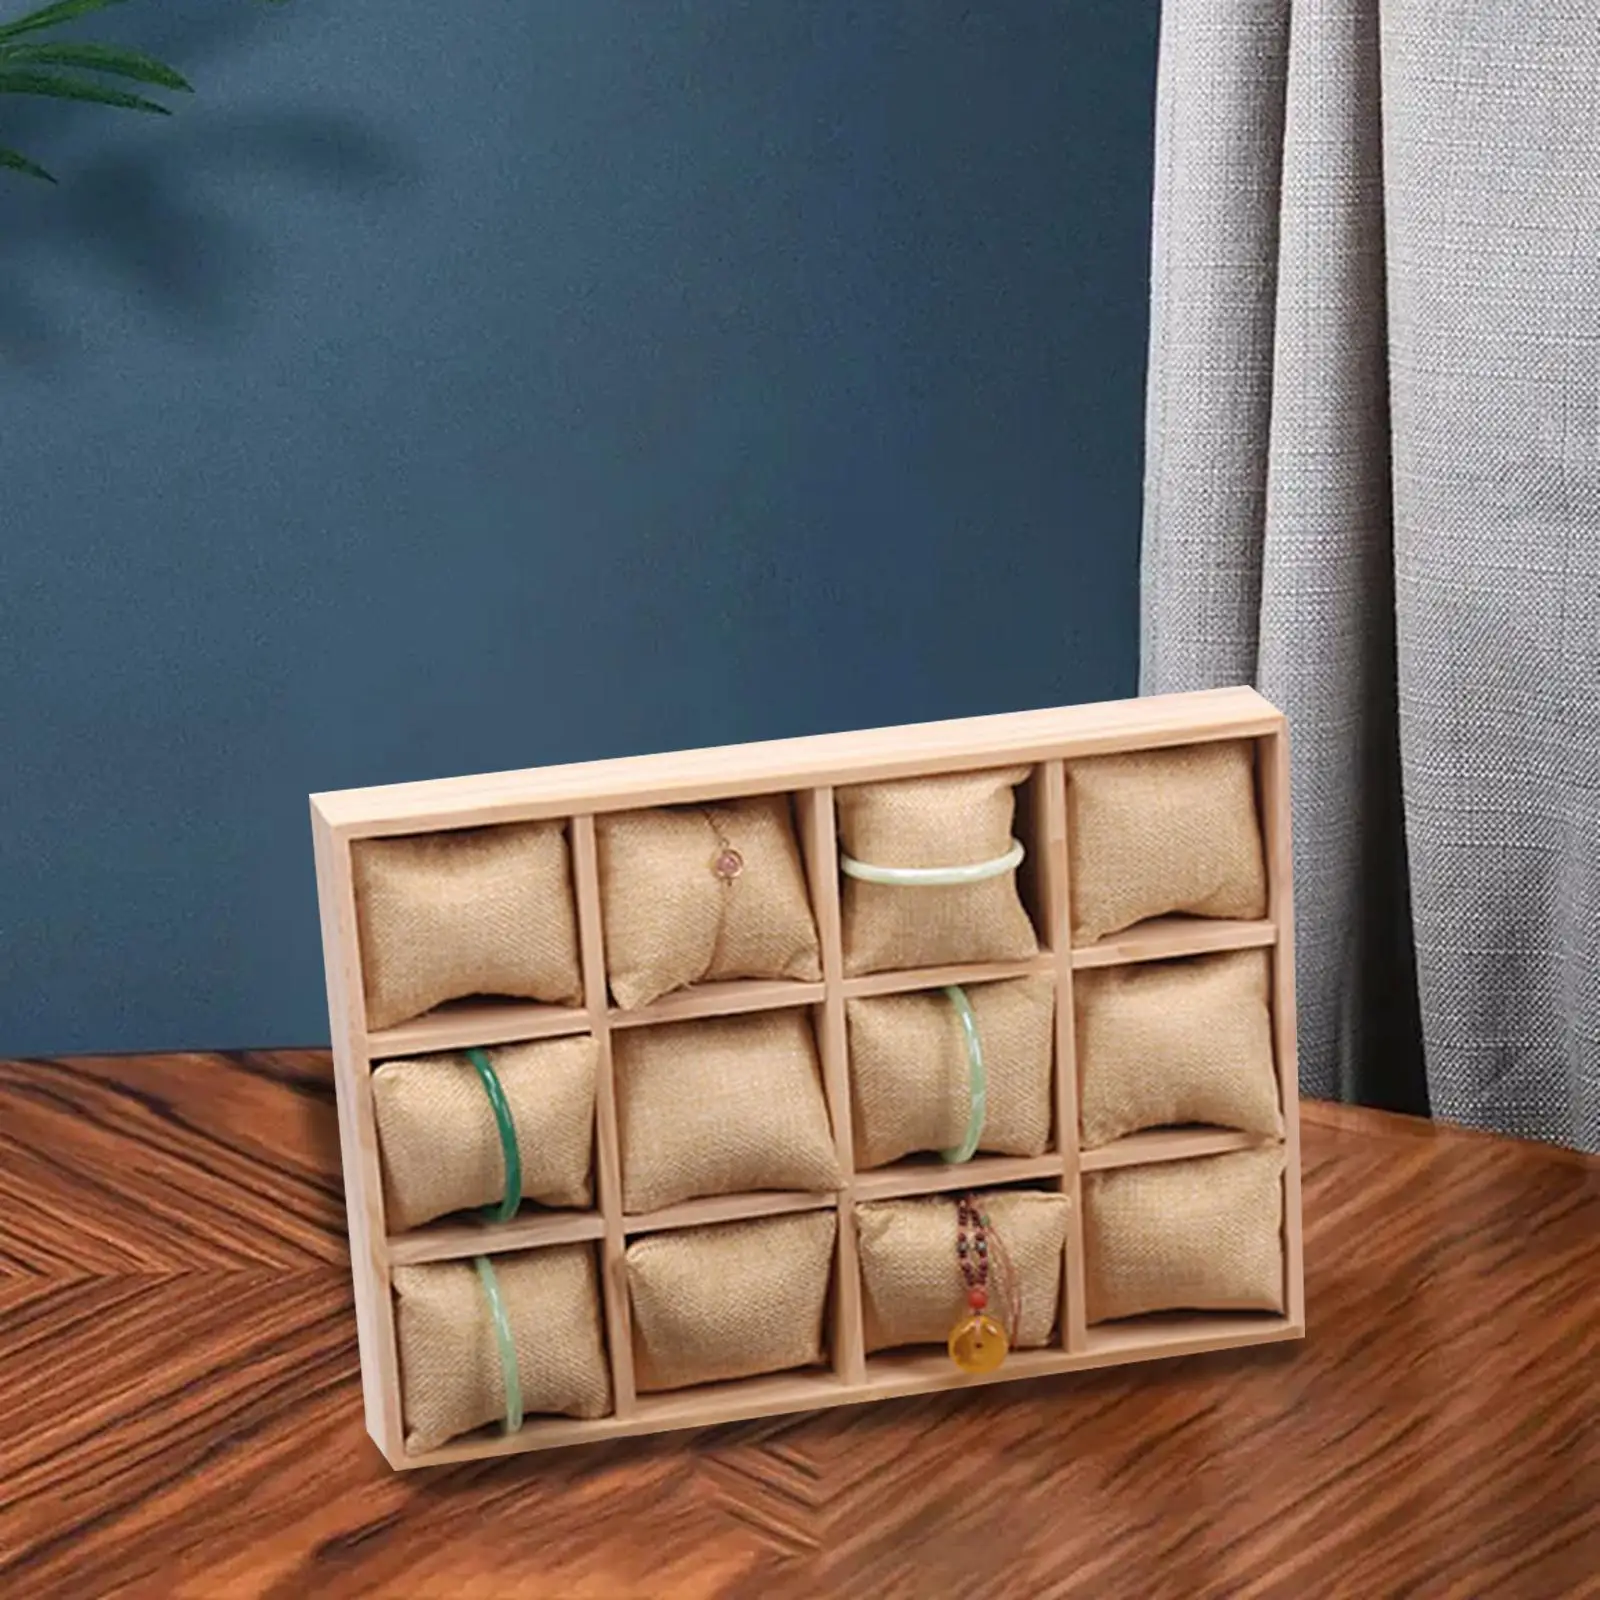 Watch Tray Stackable Wooden Bracelet Display Showcase 12 Grids Watch Organizer for Gifts Bracelets Counter Drawer Shop